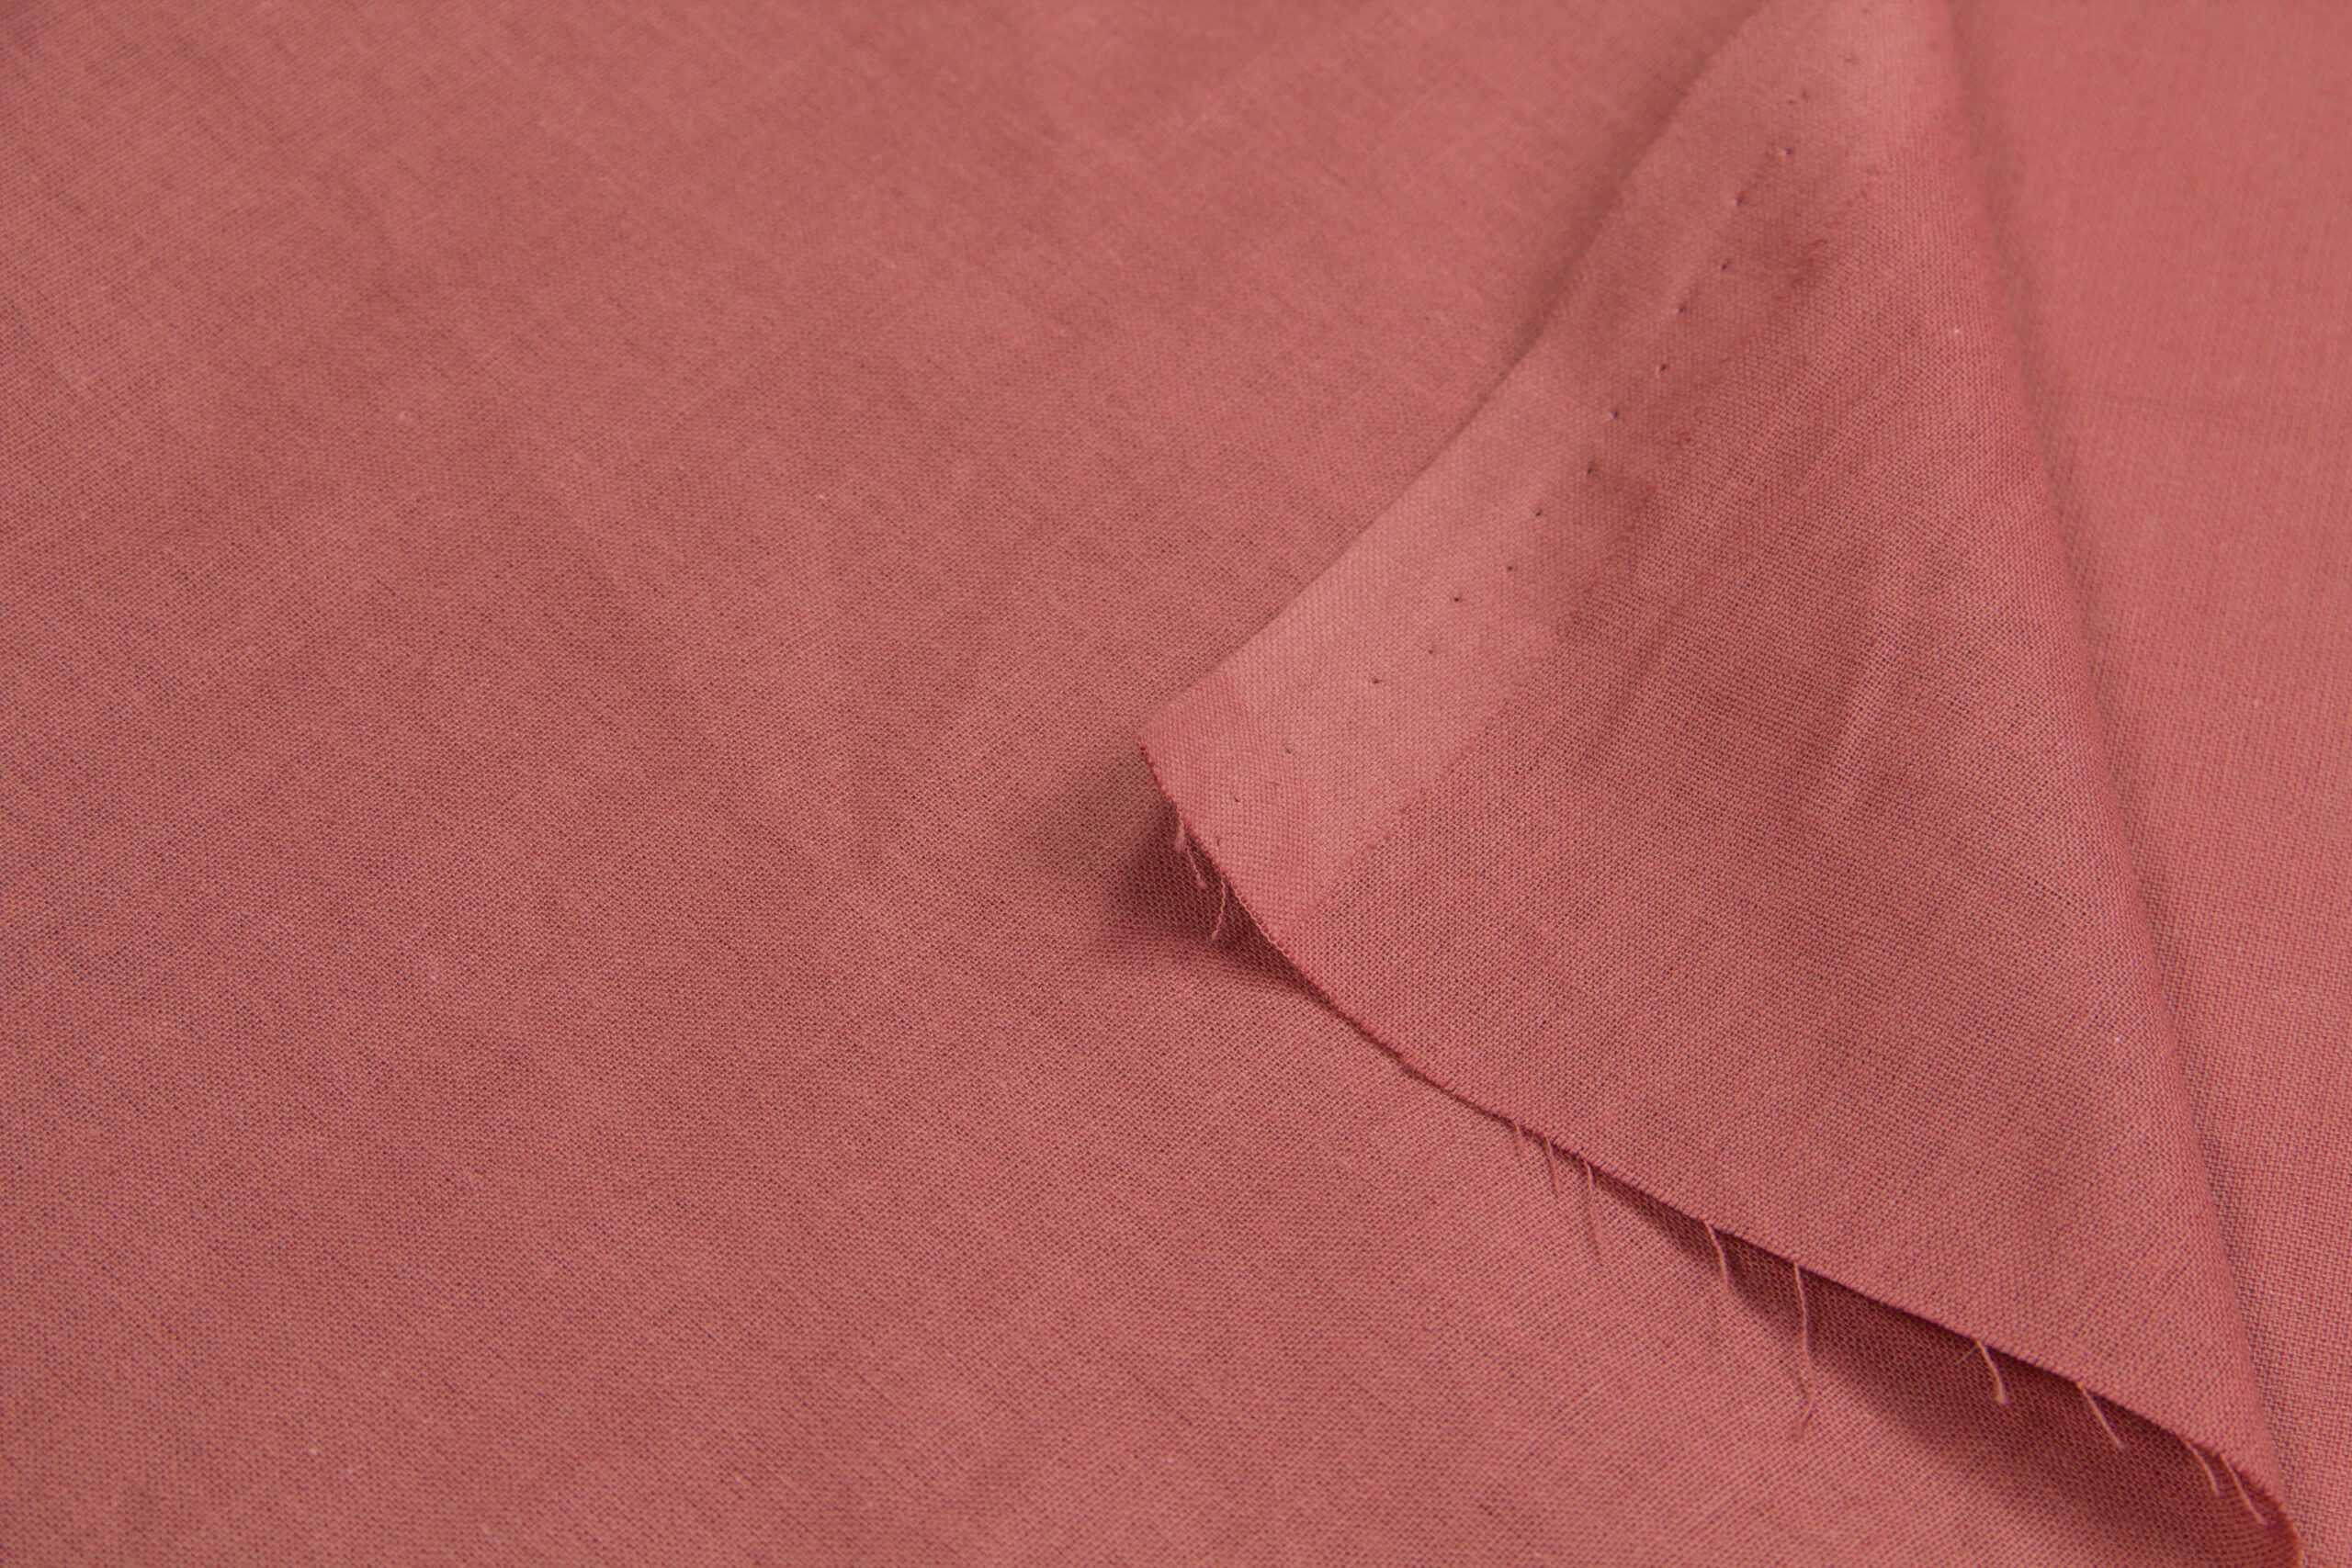 Fabric,Cloth,Textile,Poplin,Red,Background,Texture.